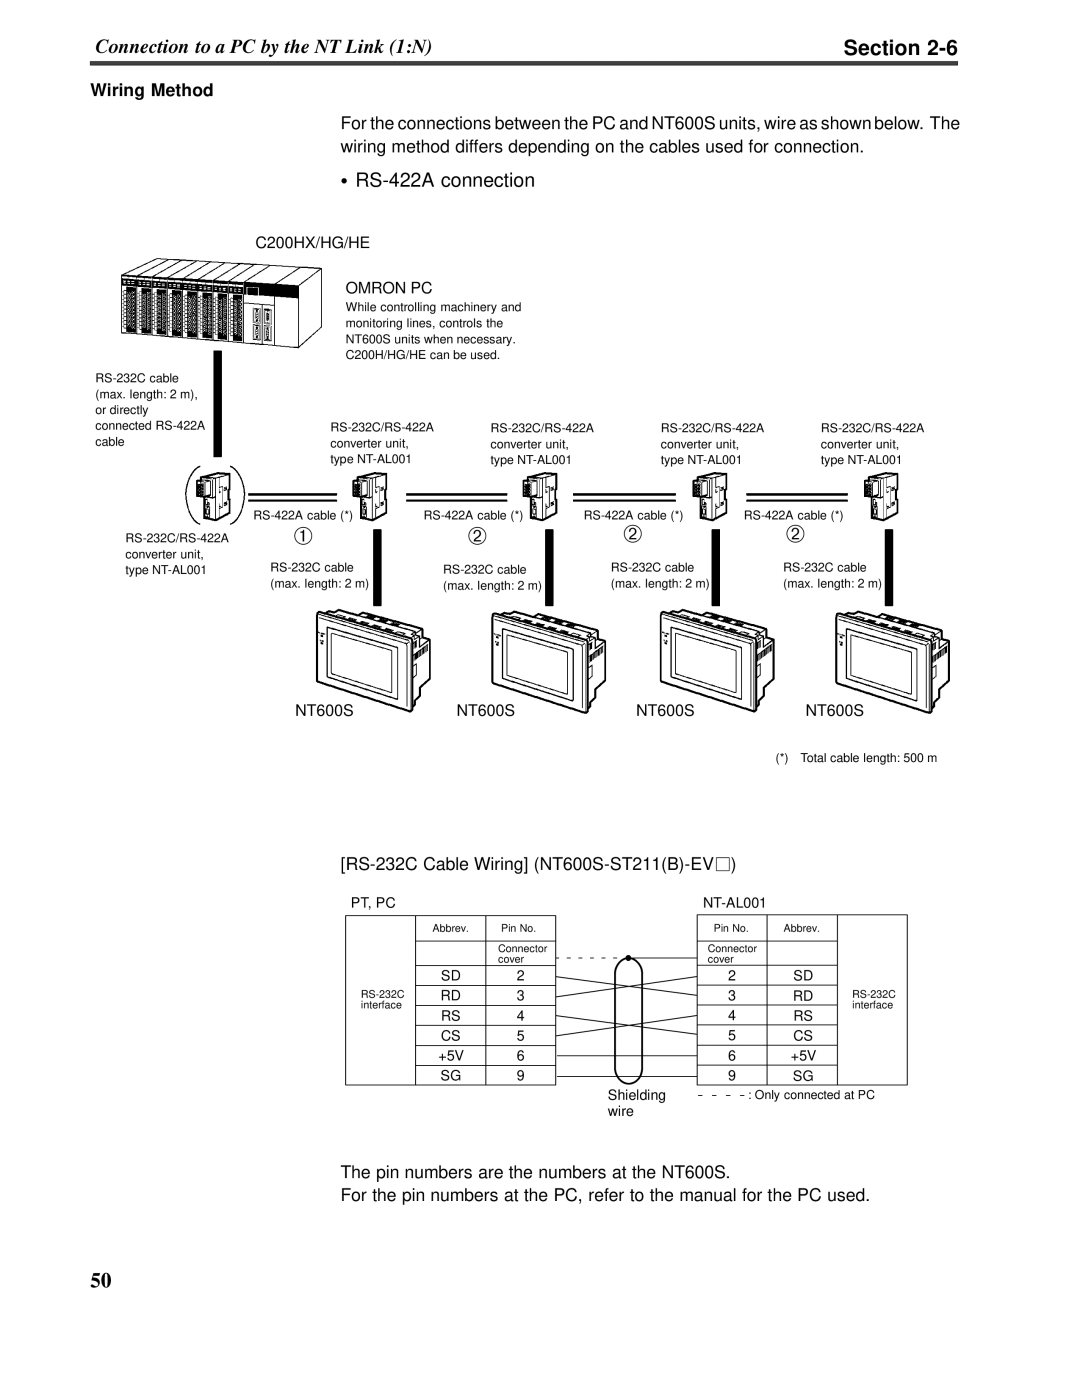 Omron V022-E3-1 operation manual Section, RS-422Aconnection, Wiring Method 